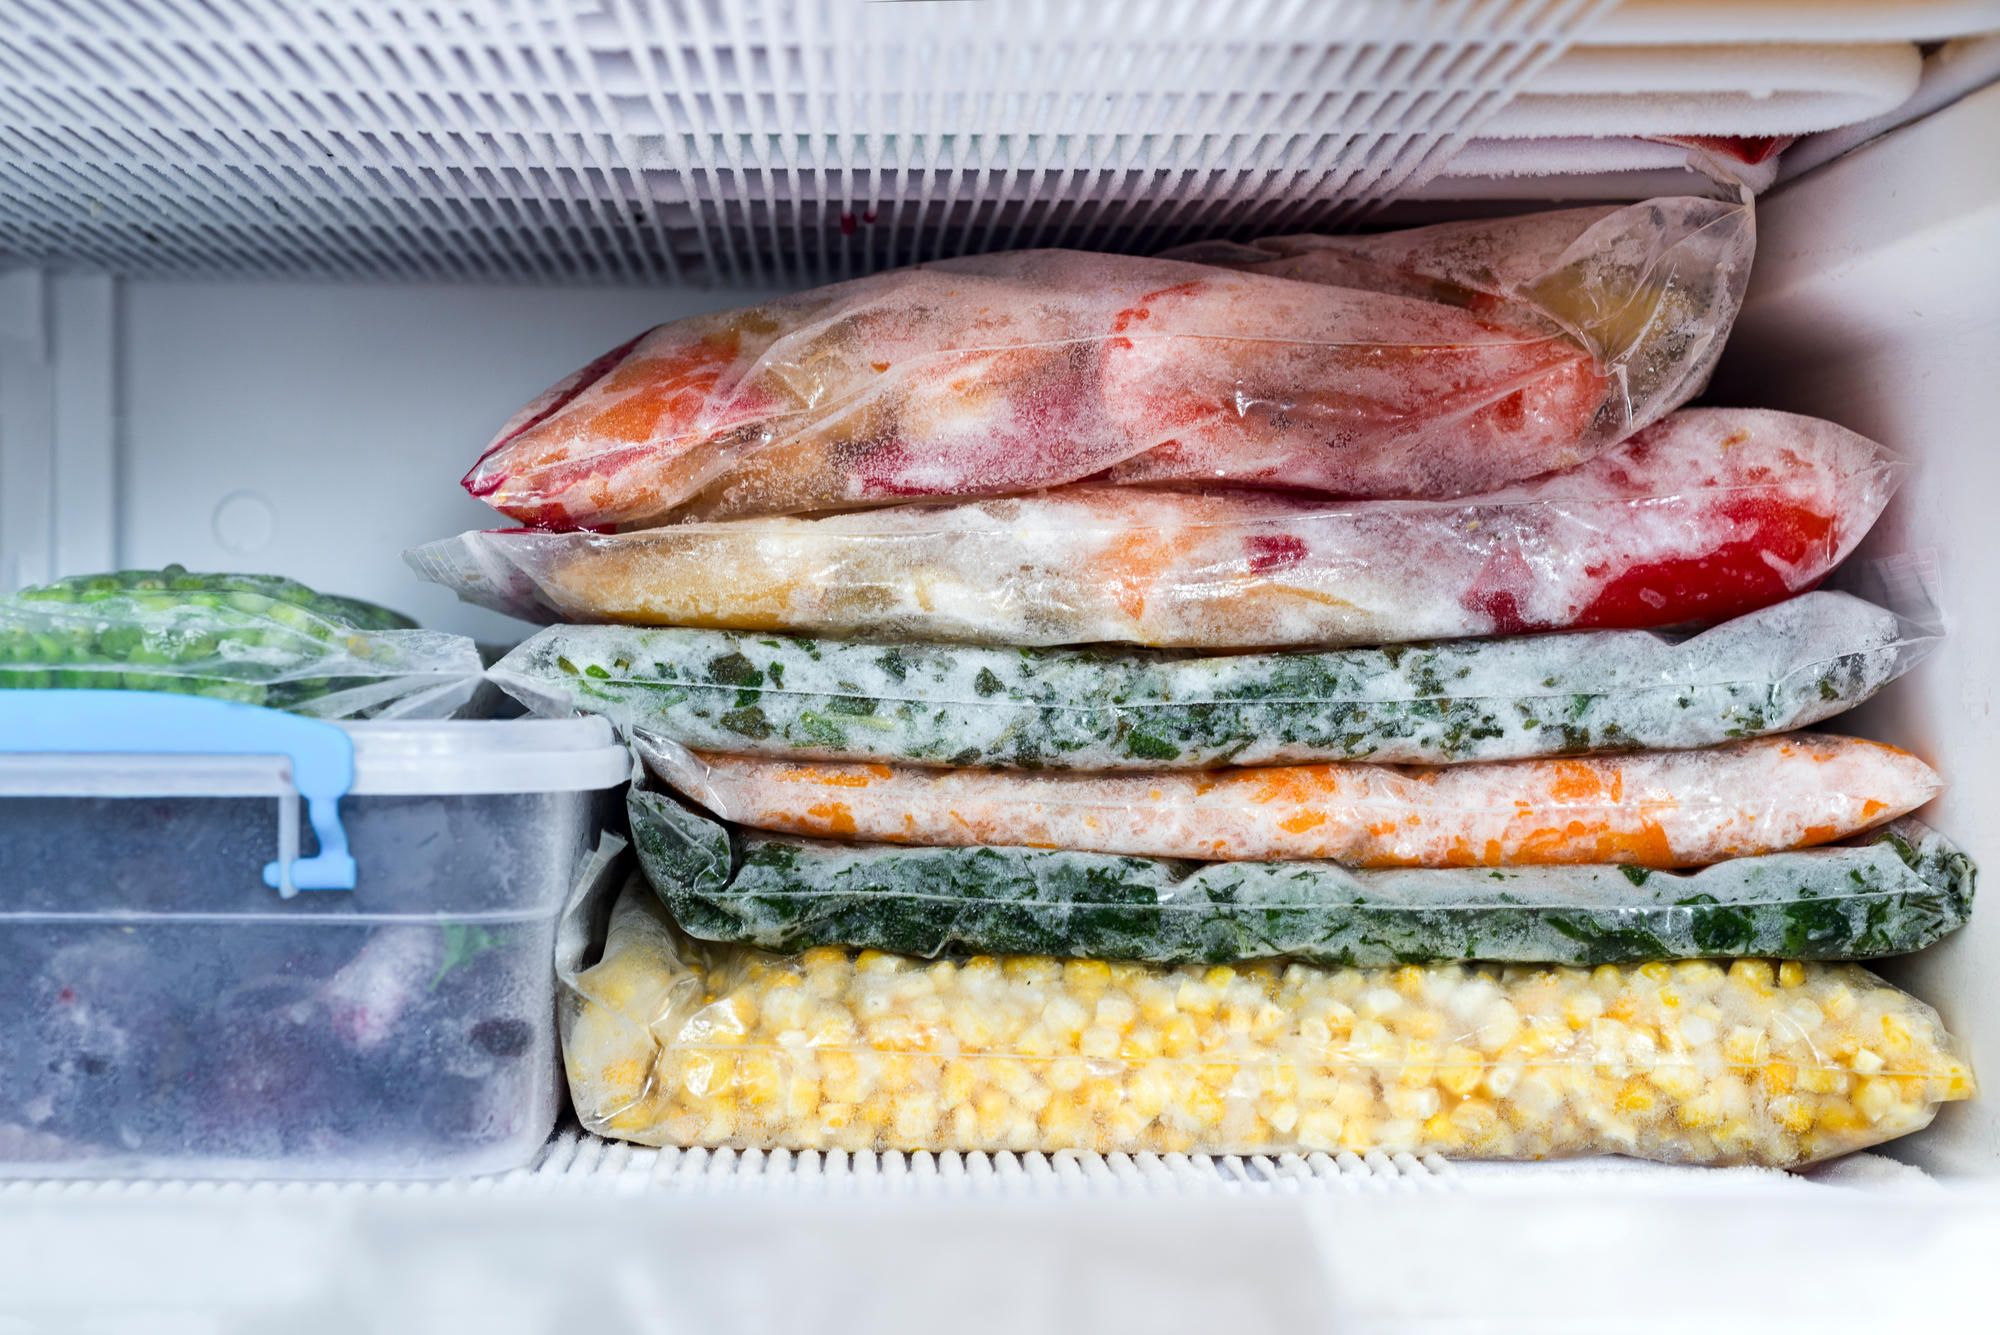 A freezer filled with bagged produce and tupperware.